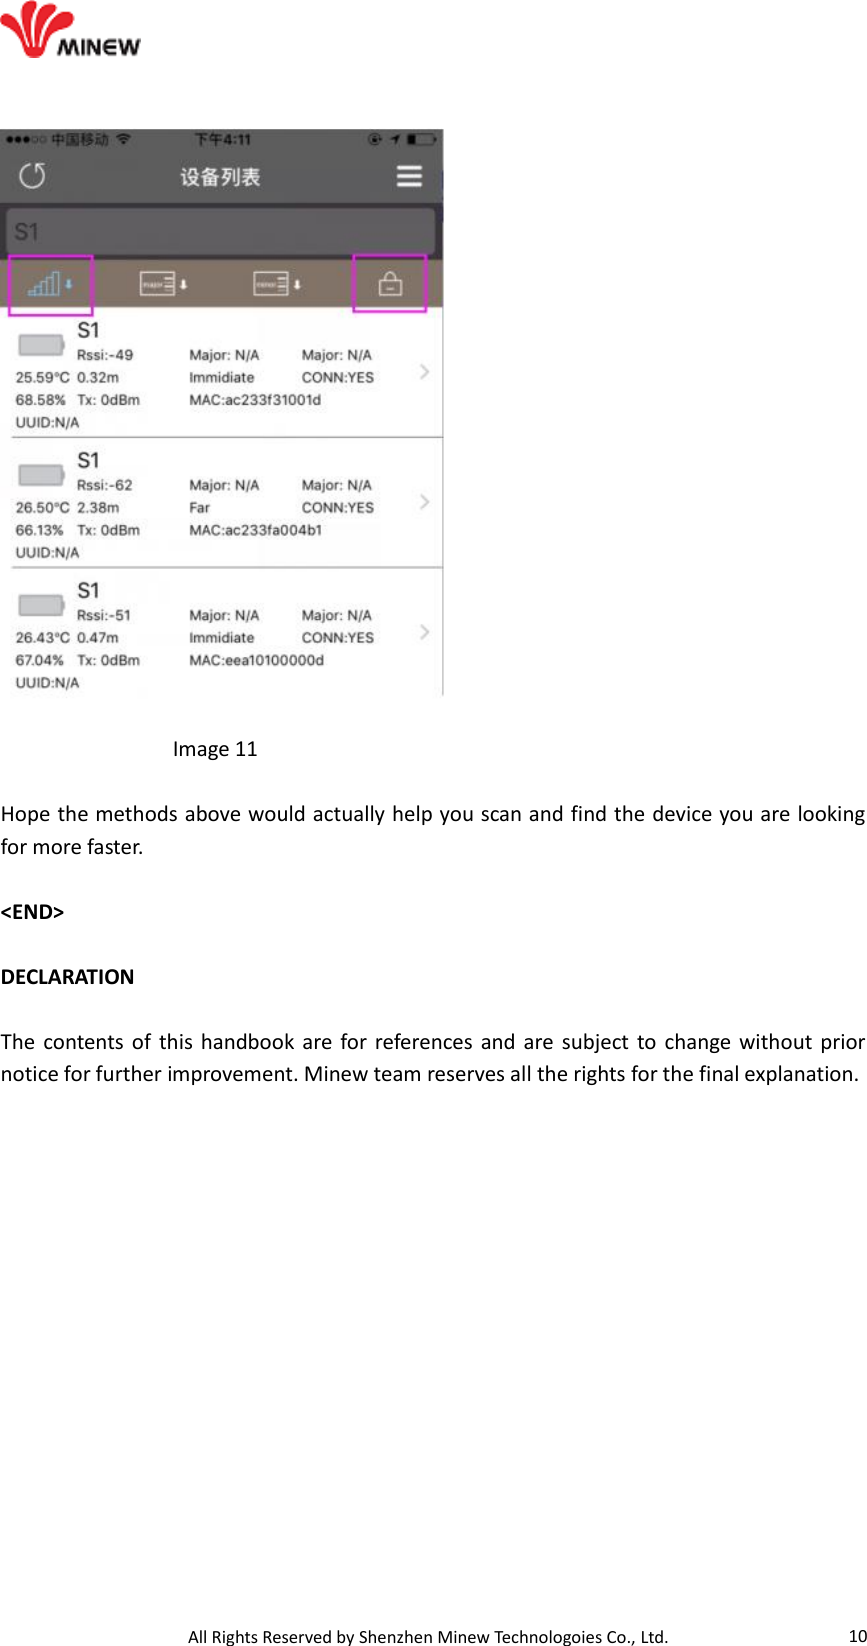                                   All Rights Reserved by Shenzhen Minew Technologoies Co., Ltd. 10                 Image 11  Hope the methods above would actually help you scan and find the device you are looking for more faster.  &lt;END&gt;  DECLARATION  The contents of  this  handbook are for references  and are subject  to change without prior notice for further improvement. Minew team reserves all the rights for the final explanation.  